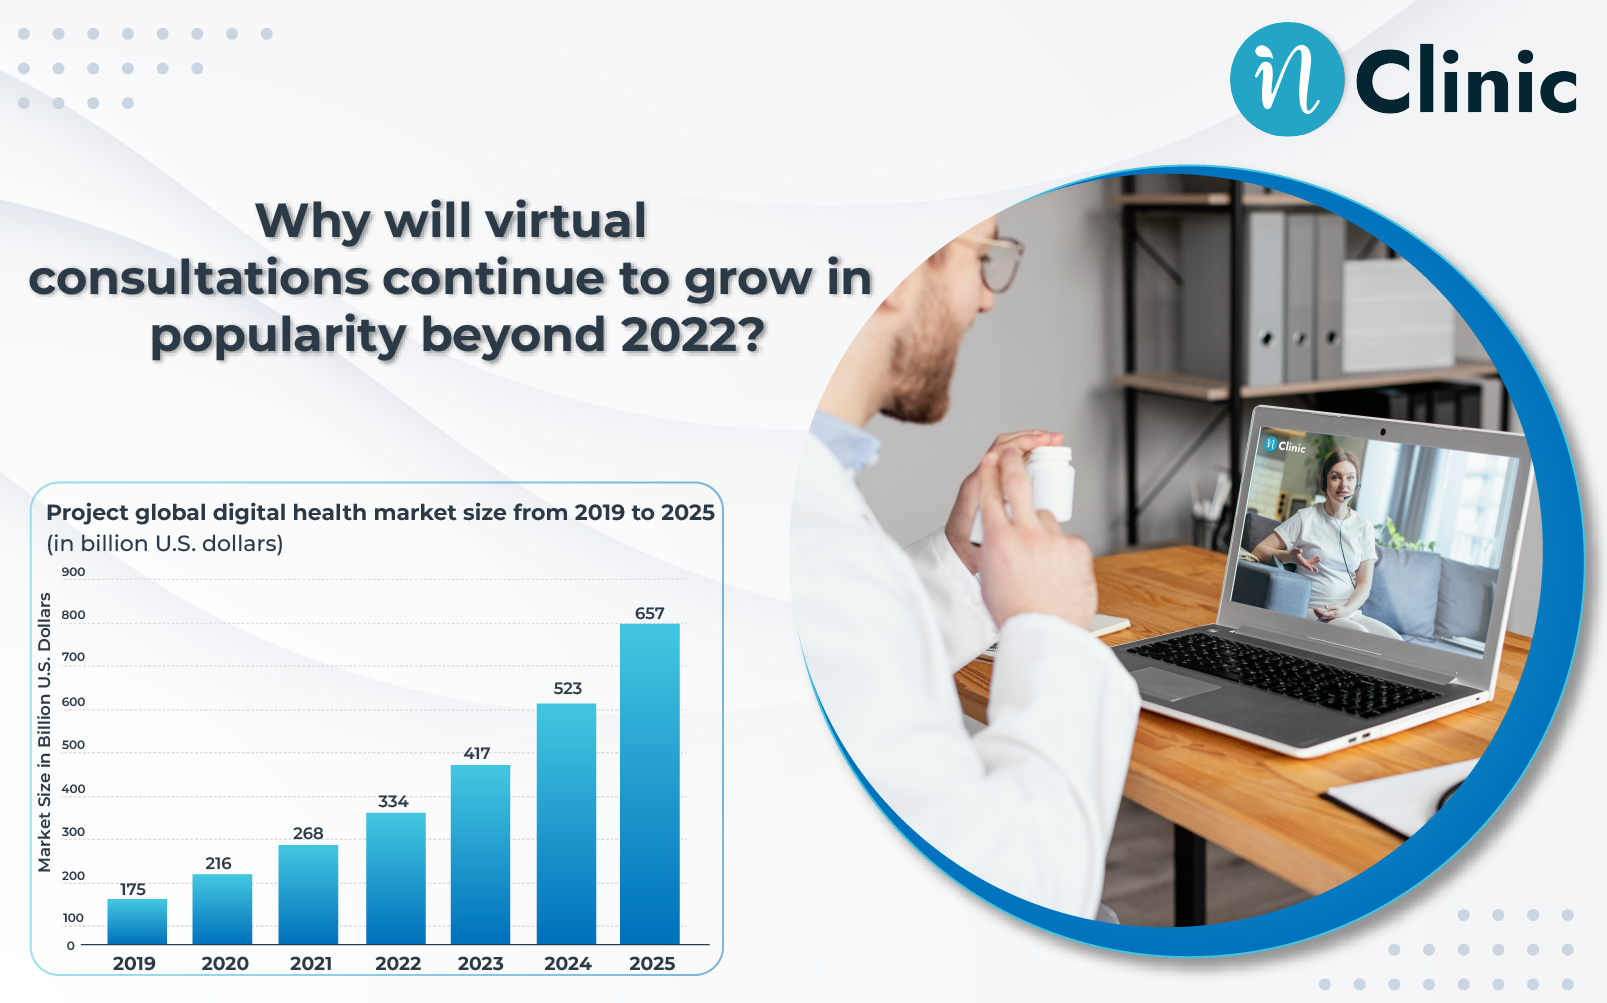 Why will virtual consultations continue to grow in popularity beyond 2022?